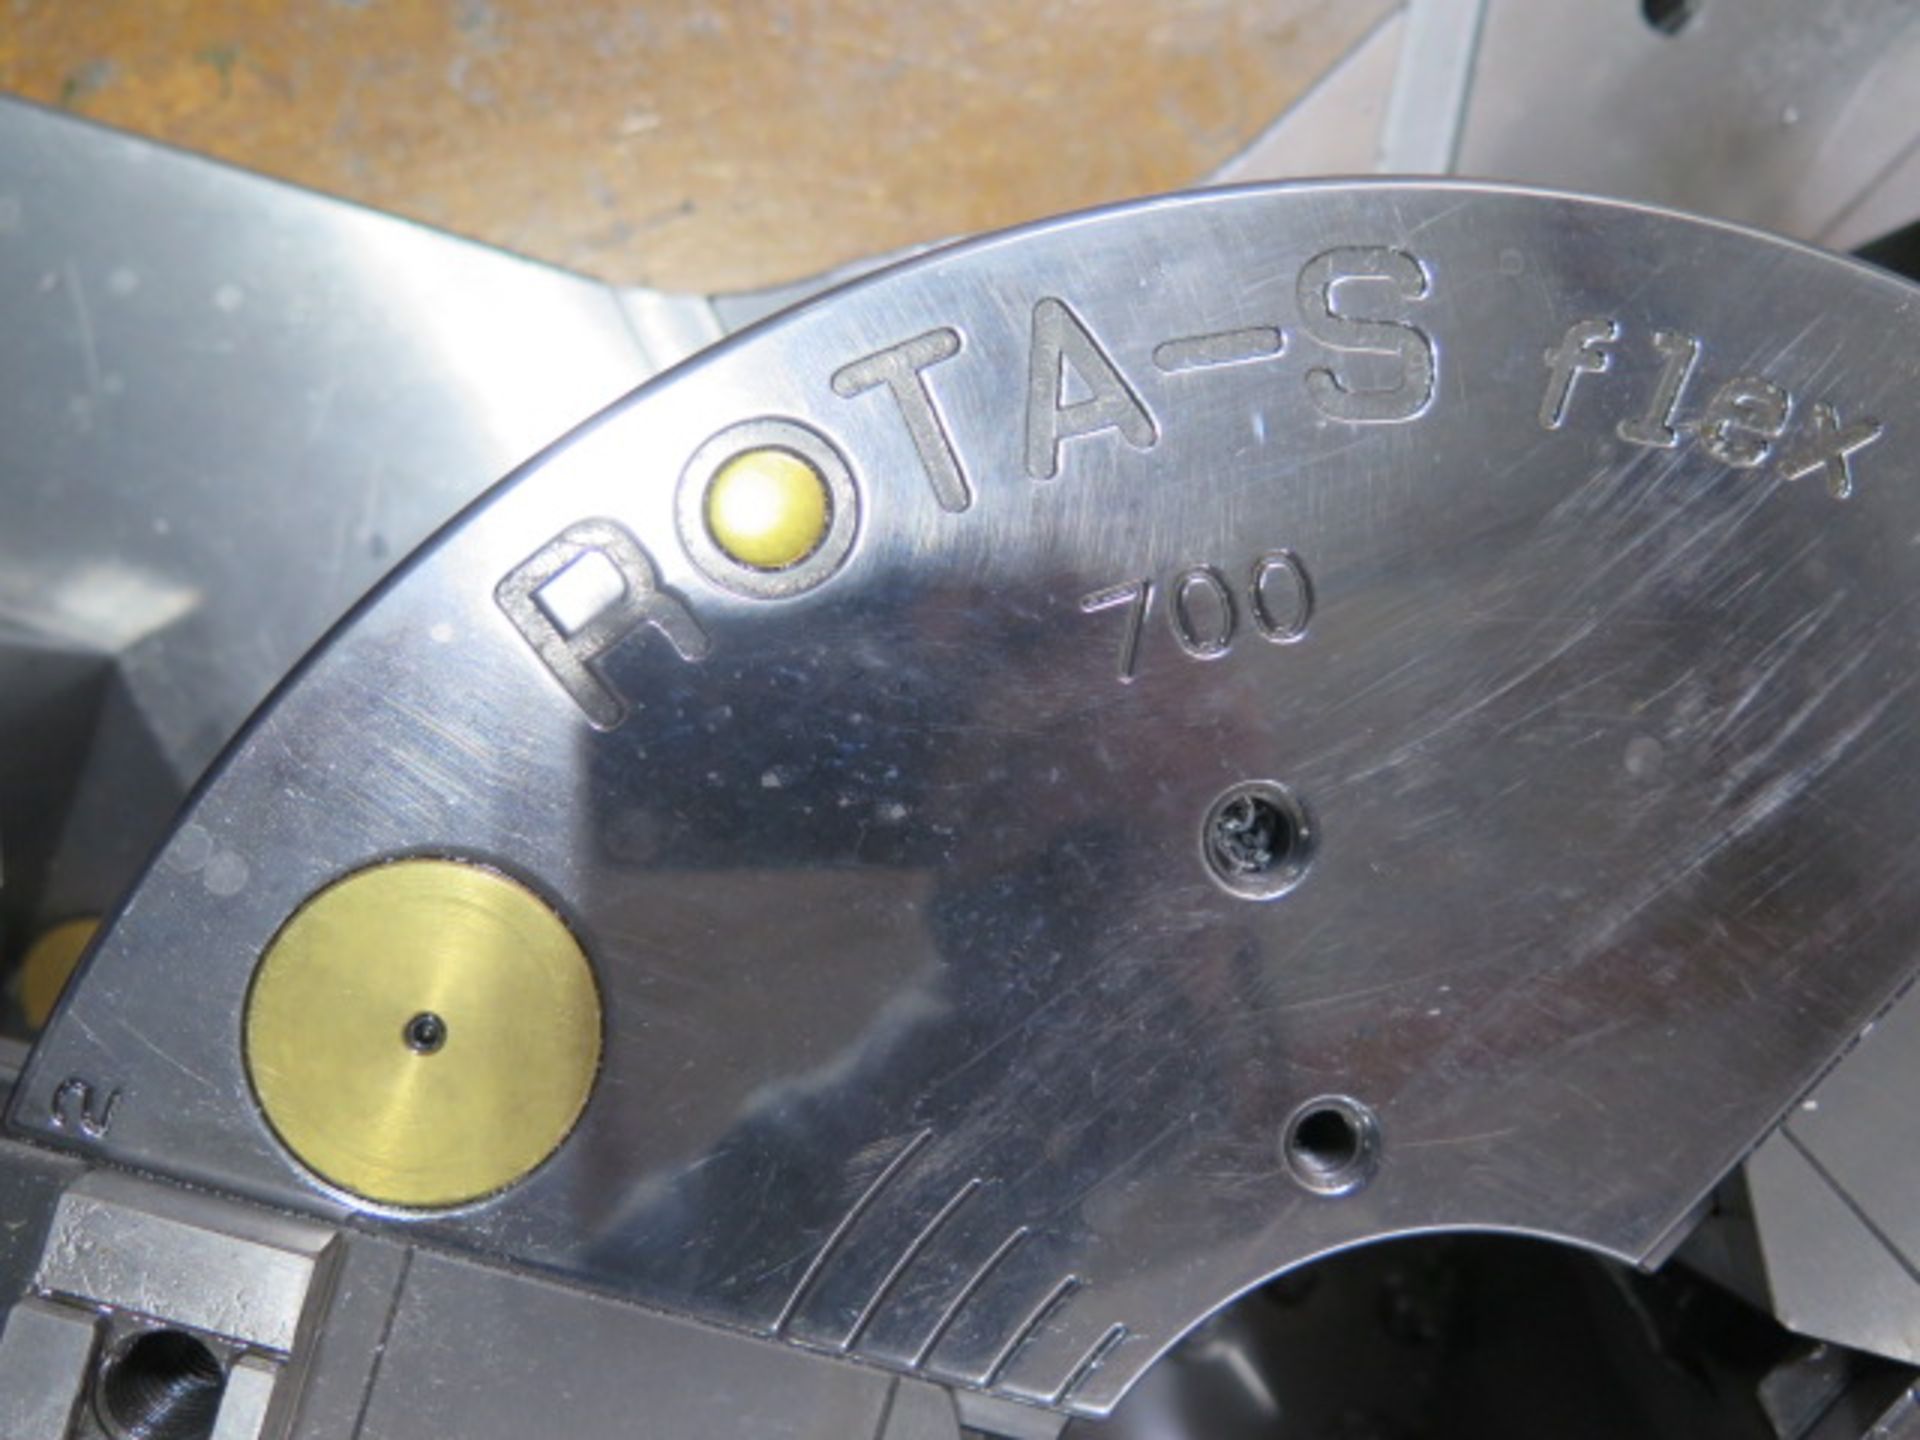 Shunk “ROTA-S flex 700” 31” 3-Jaw Chuck w/ Mounting Base (SOLD AS-IS - NO WARRANTY) - Image 10 of 11